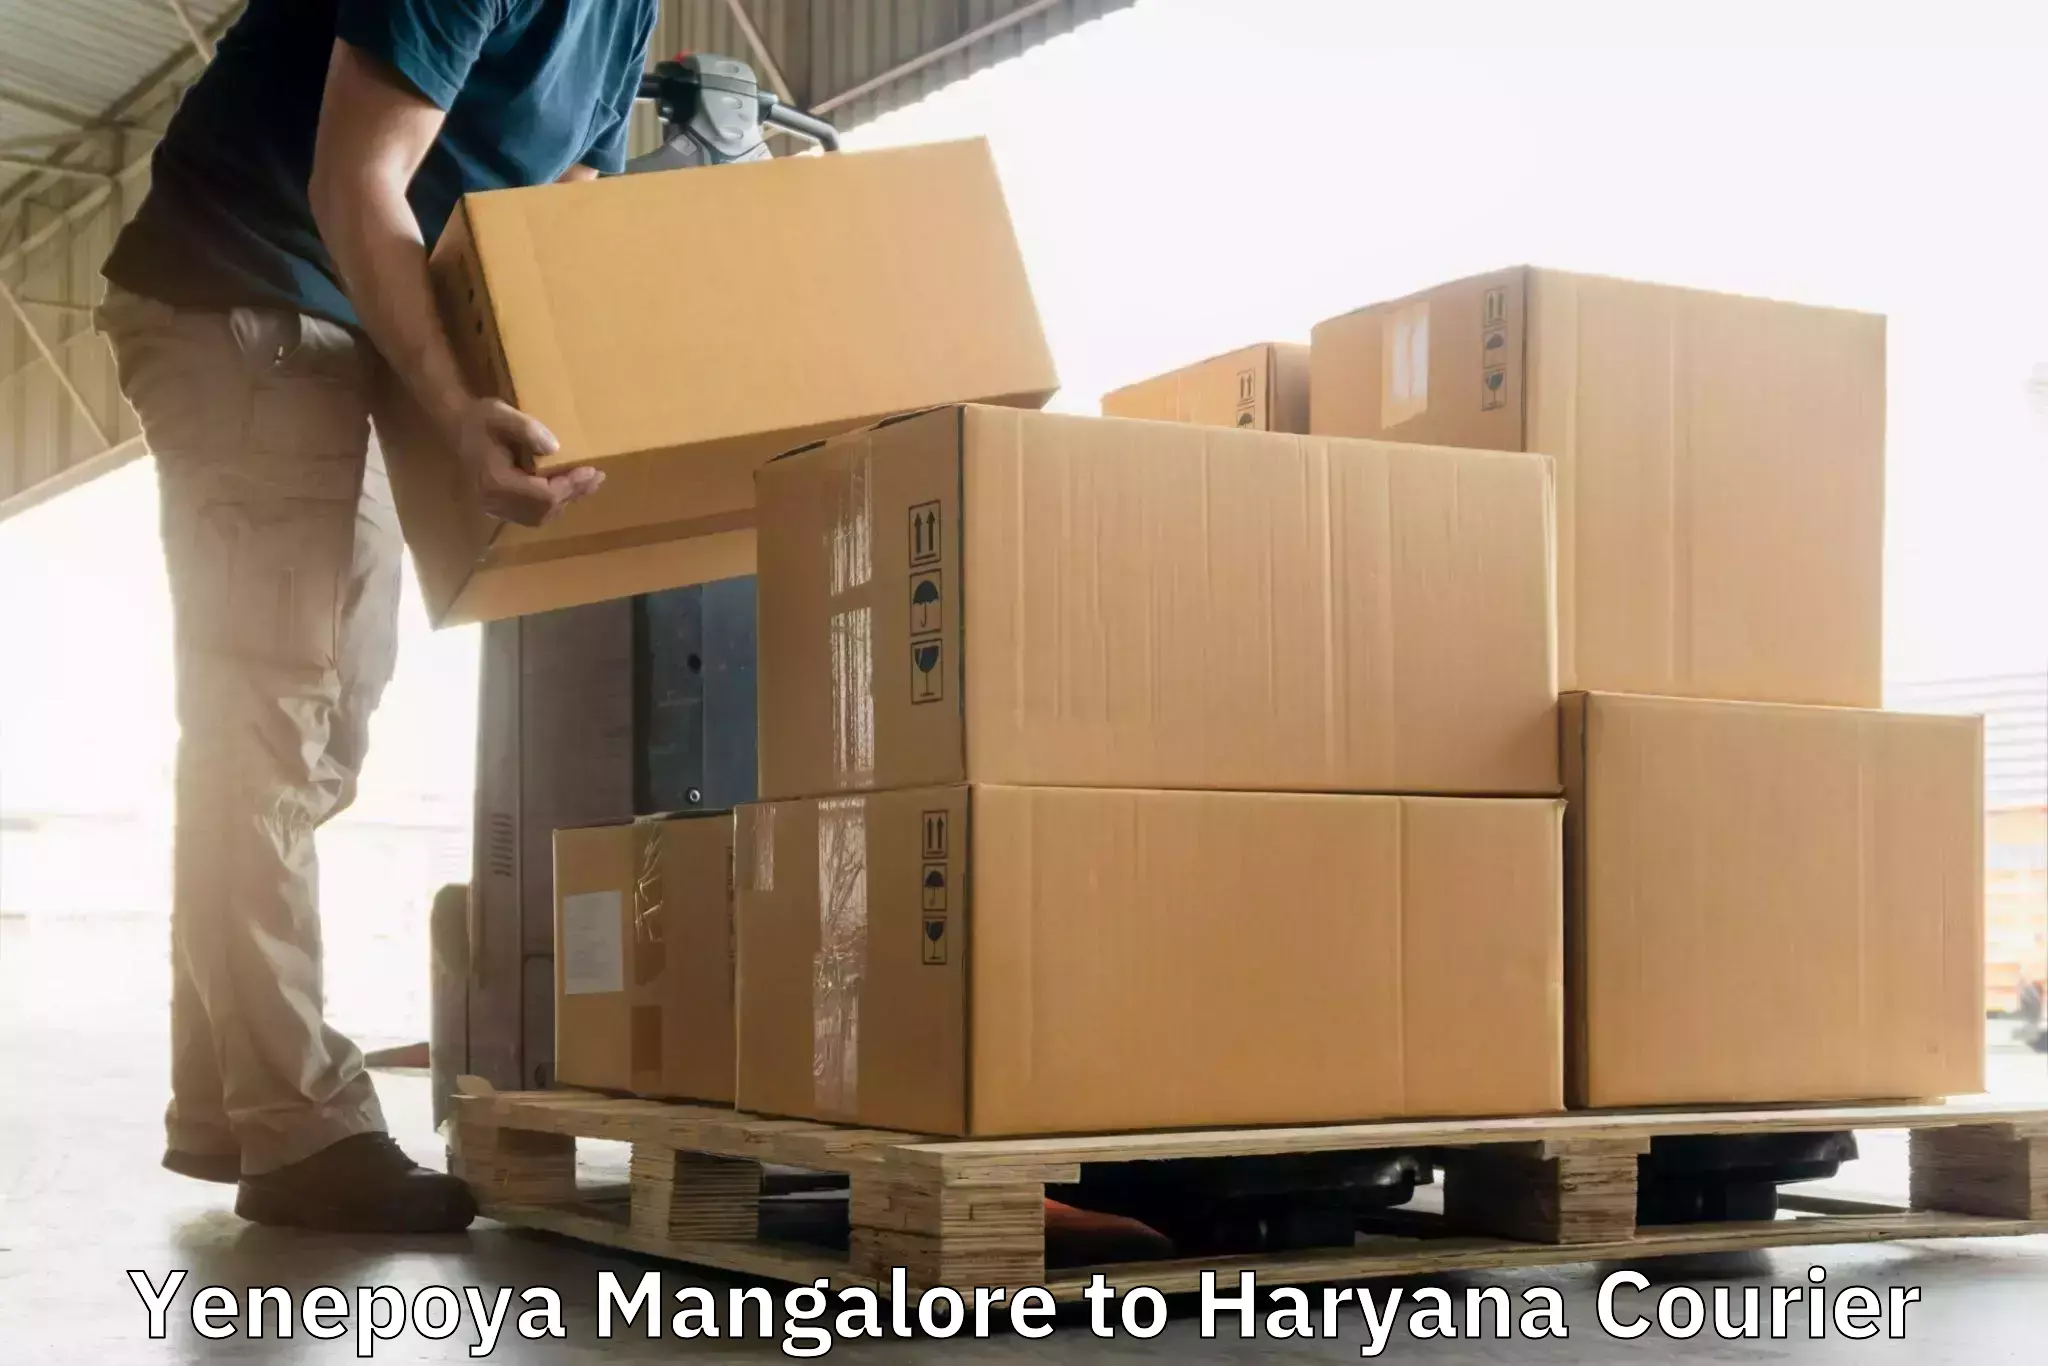 Comprehensive parcel tracking Yenepoya Mangalore to Chaudhary Charan Singh Haryana Agricultural University Hisar